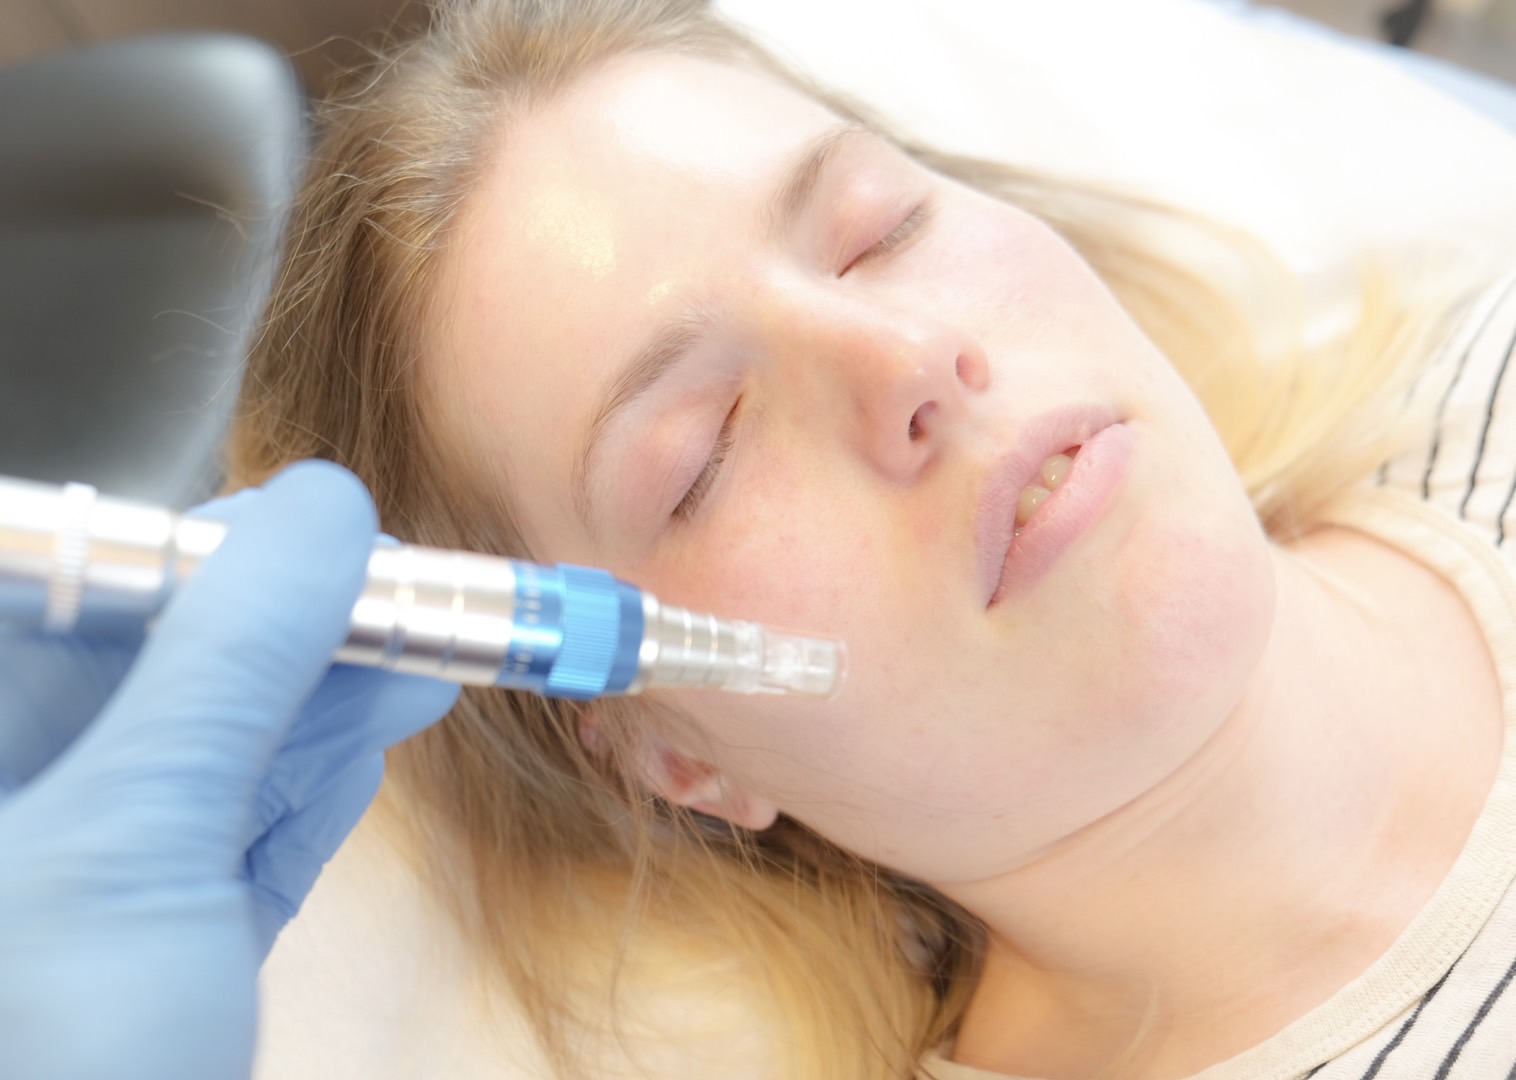 prp microneedling at new health medical center